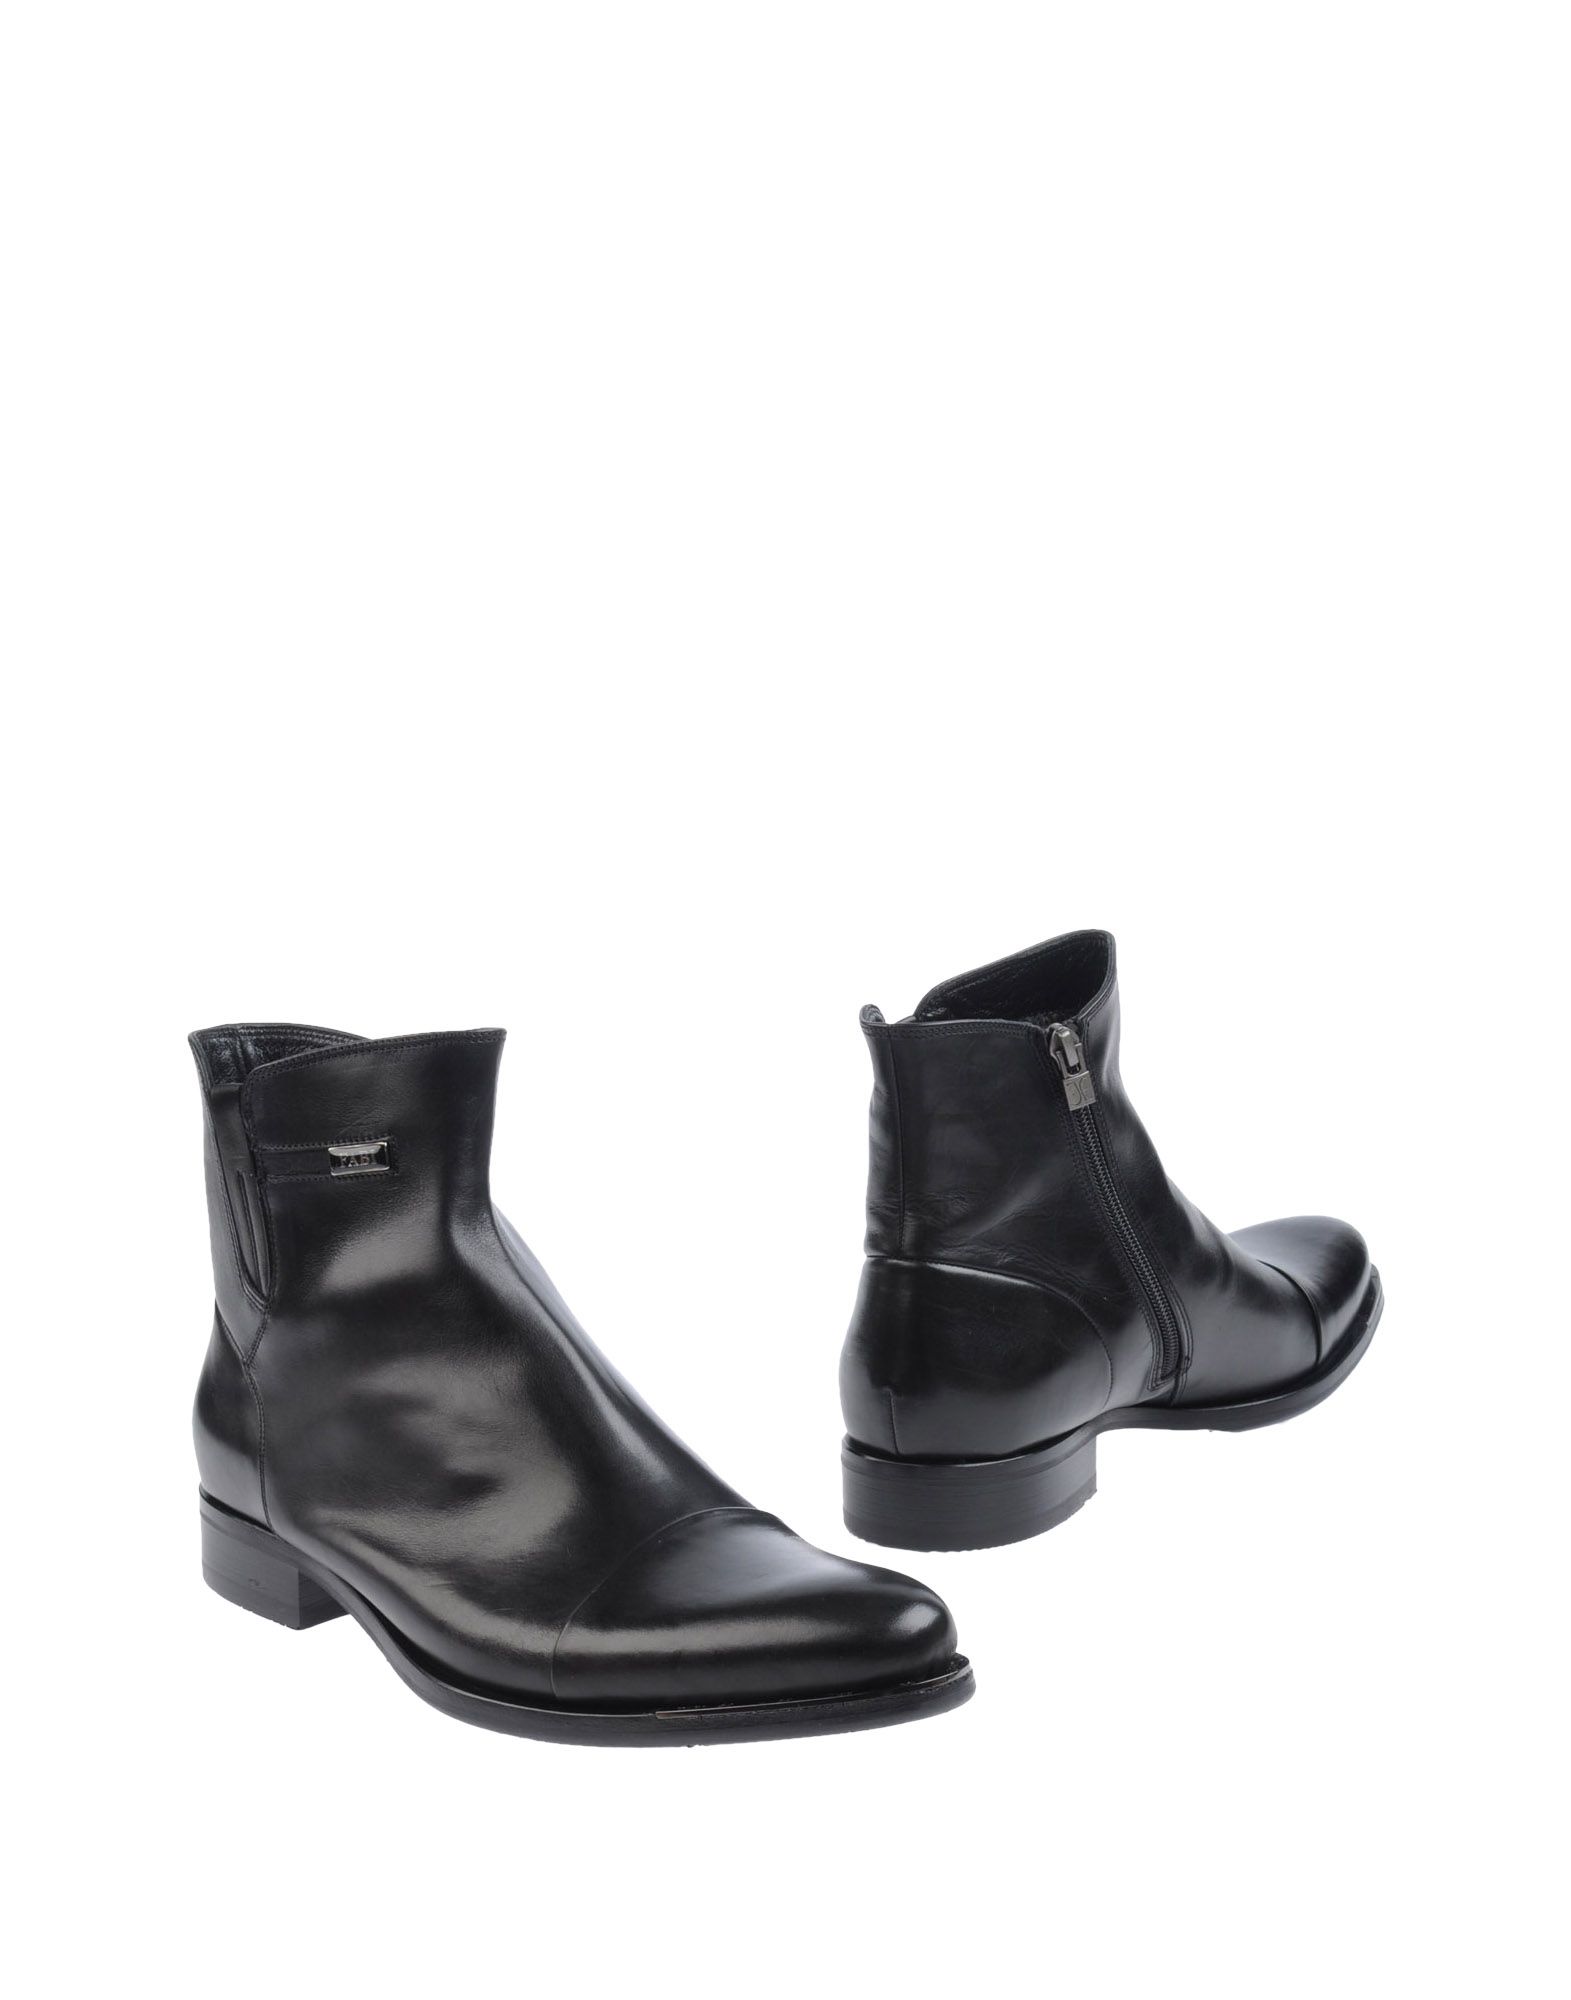 Fabi Leather Ankle Boots in Black for Men - Lyst